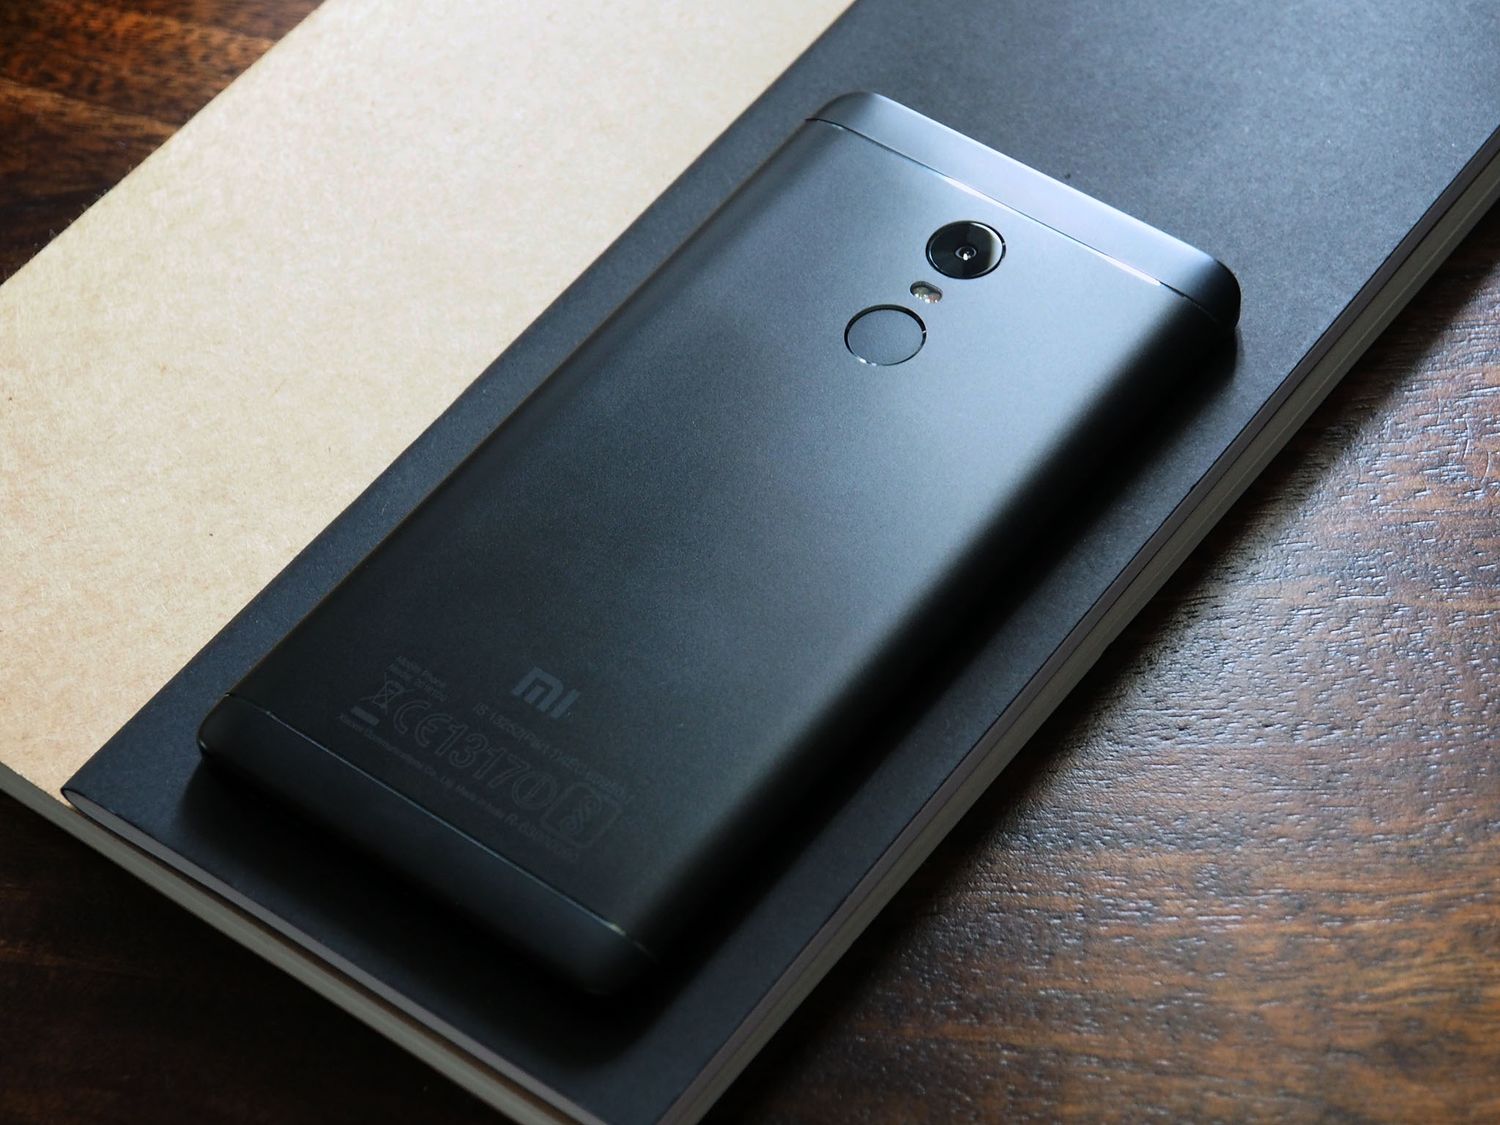 xiaomi-redmi-note-4-news-specs-and-availability